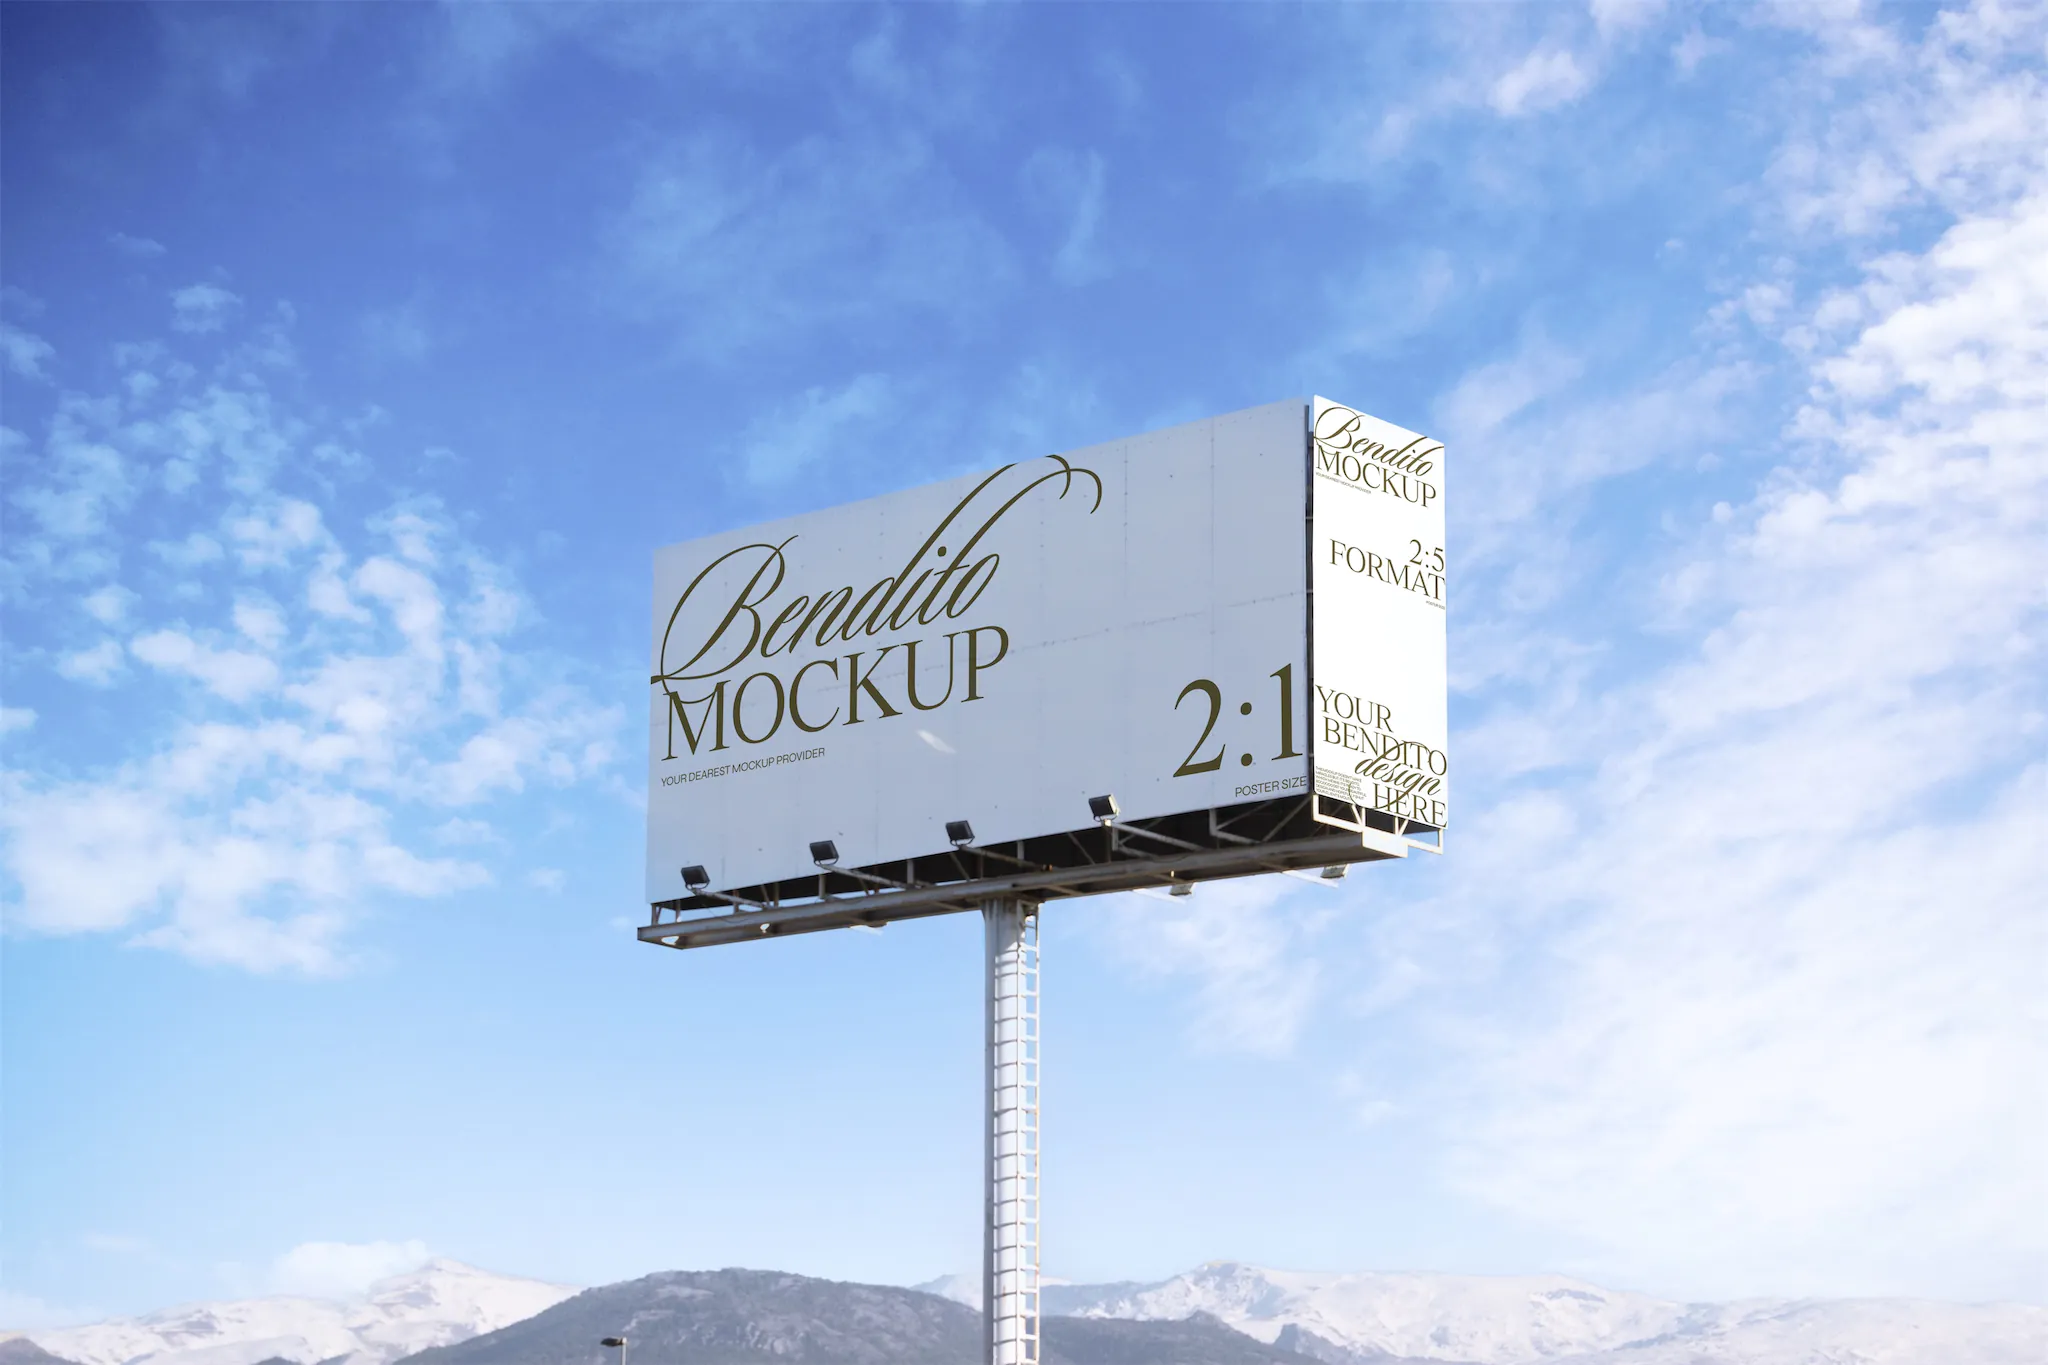 Billboard mockup with sky background with clouds